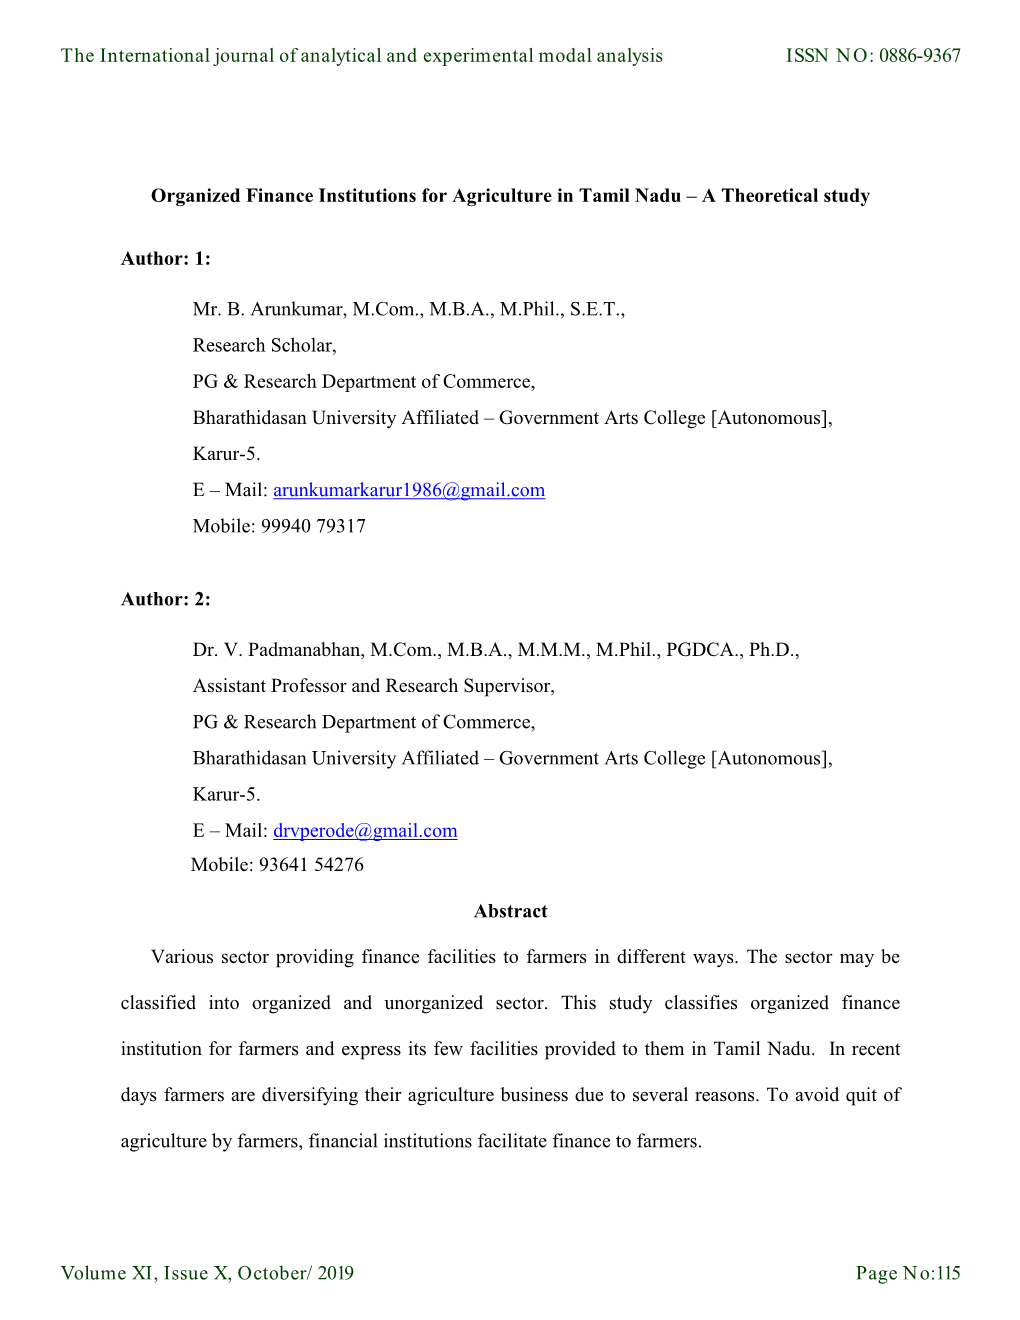 Organized Finance Institutions for Agriculture in Tamil Nadu – a Theoretical Study